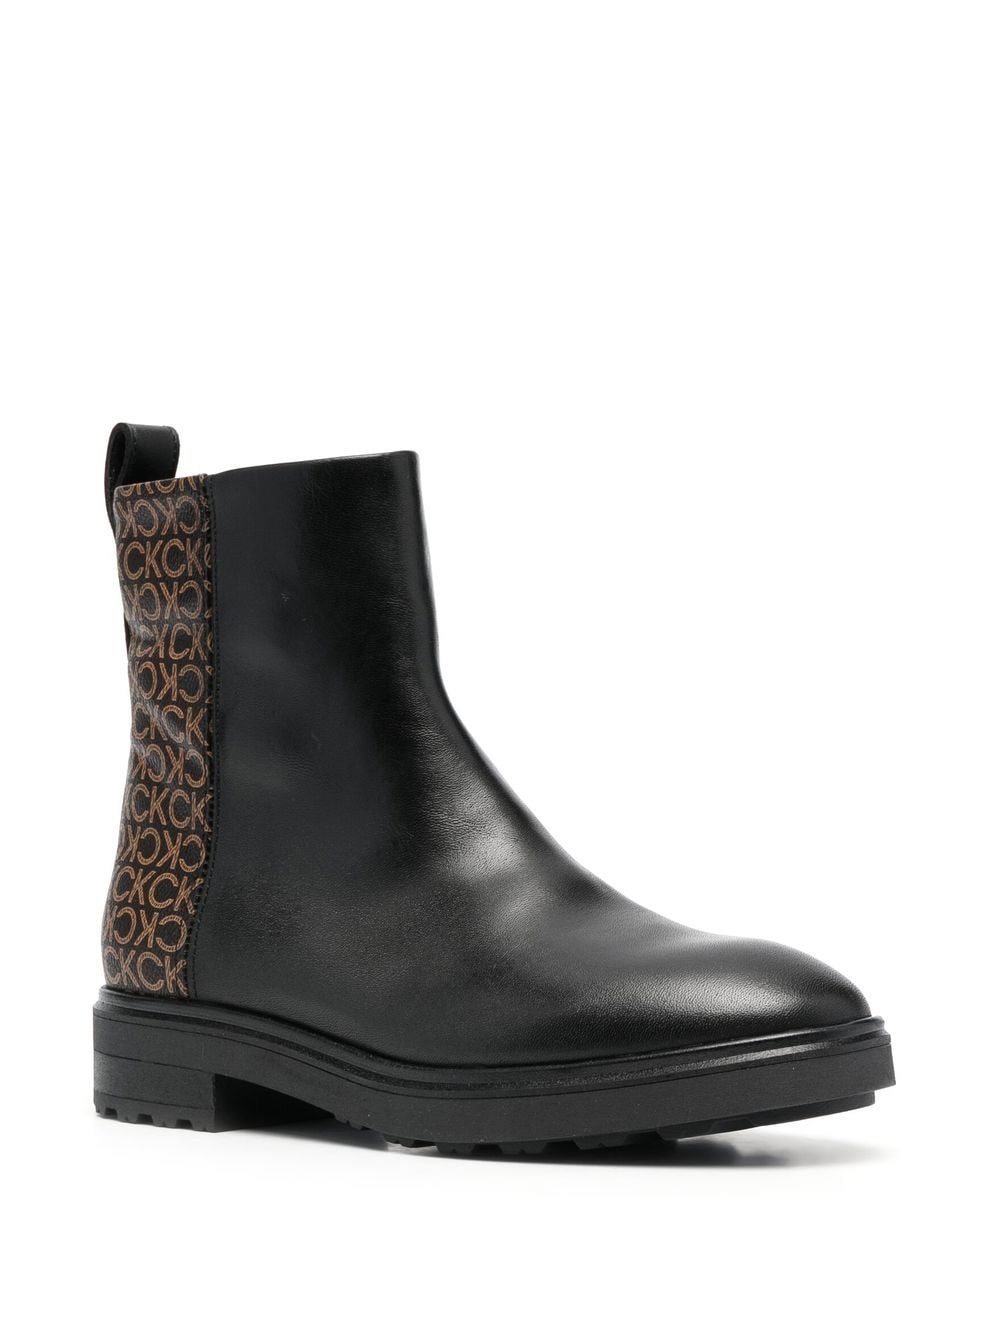 Image 2 of Calvin Klein monogram-print leather ankle boots